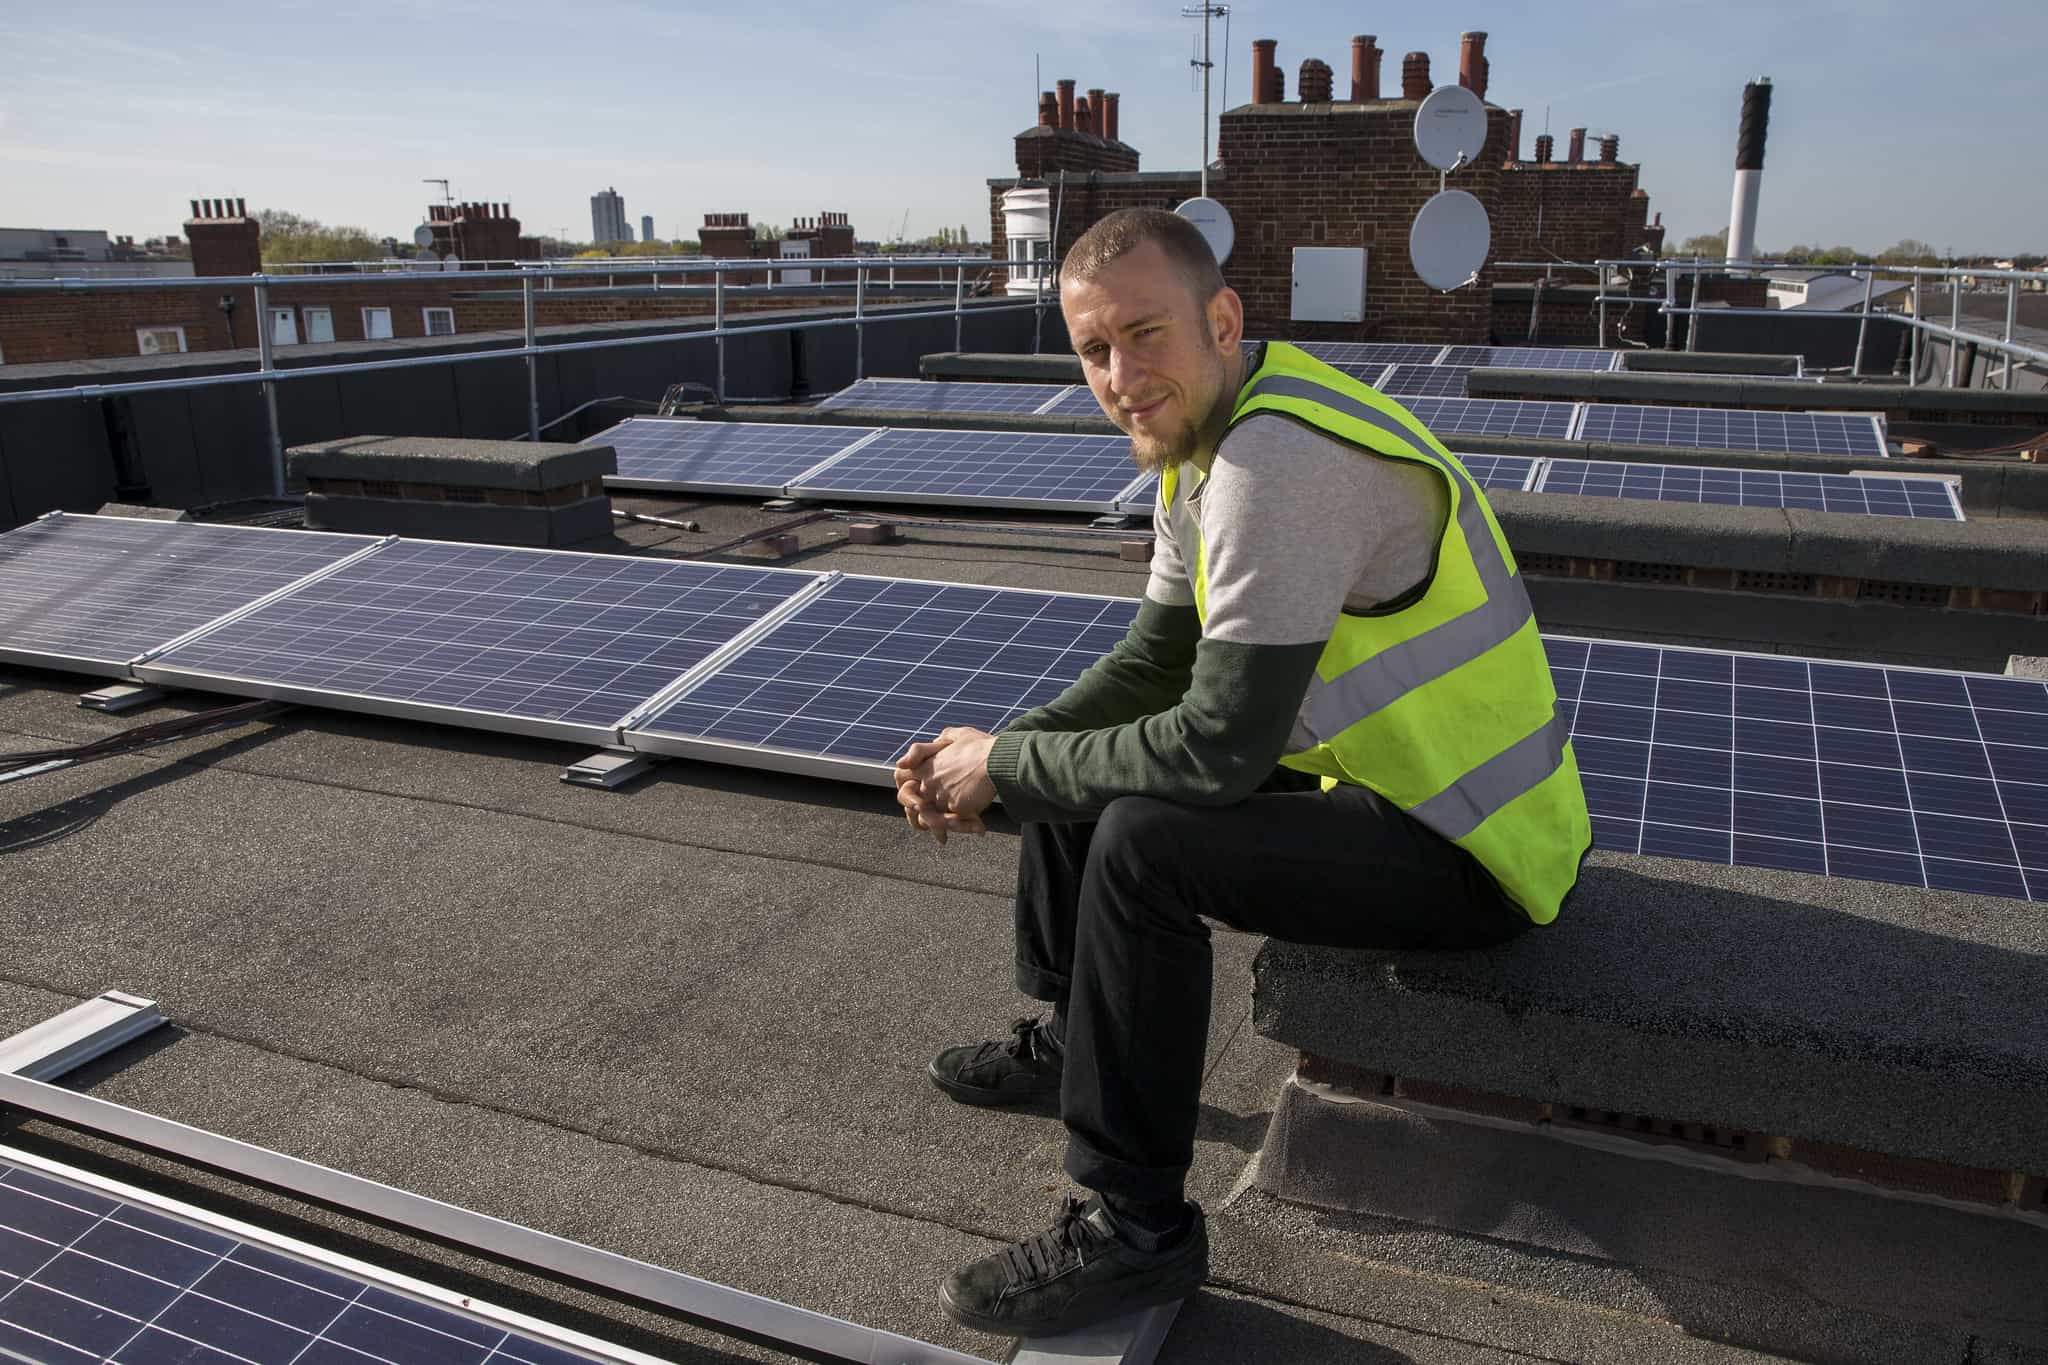 Man on rooftop next to solar panels